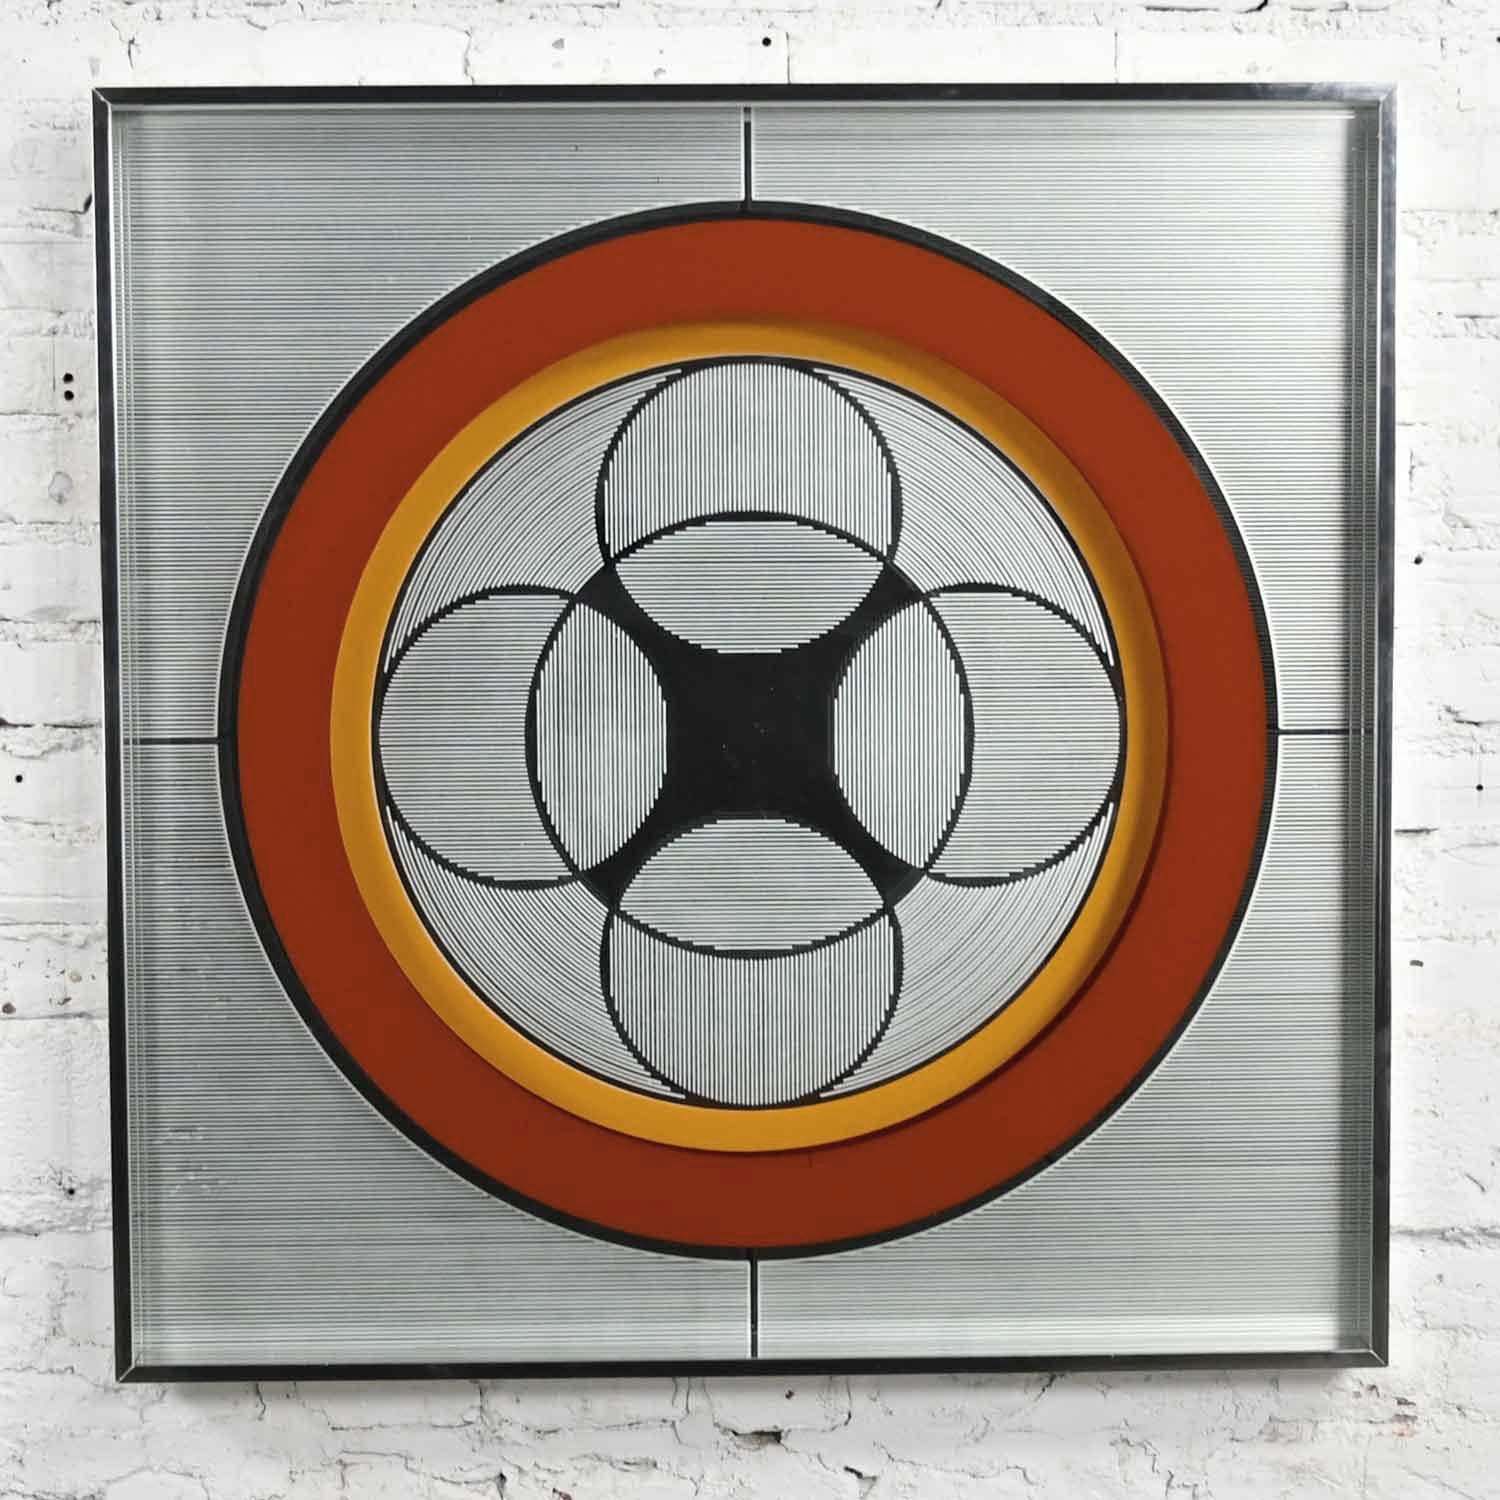 Late 20th Century Vintage Modern Mod Op Art or Pop Art Mirror by Greg Copeland Style #1034  For Sale